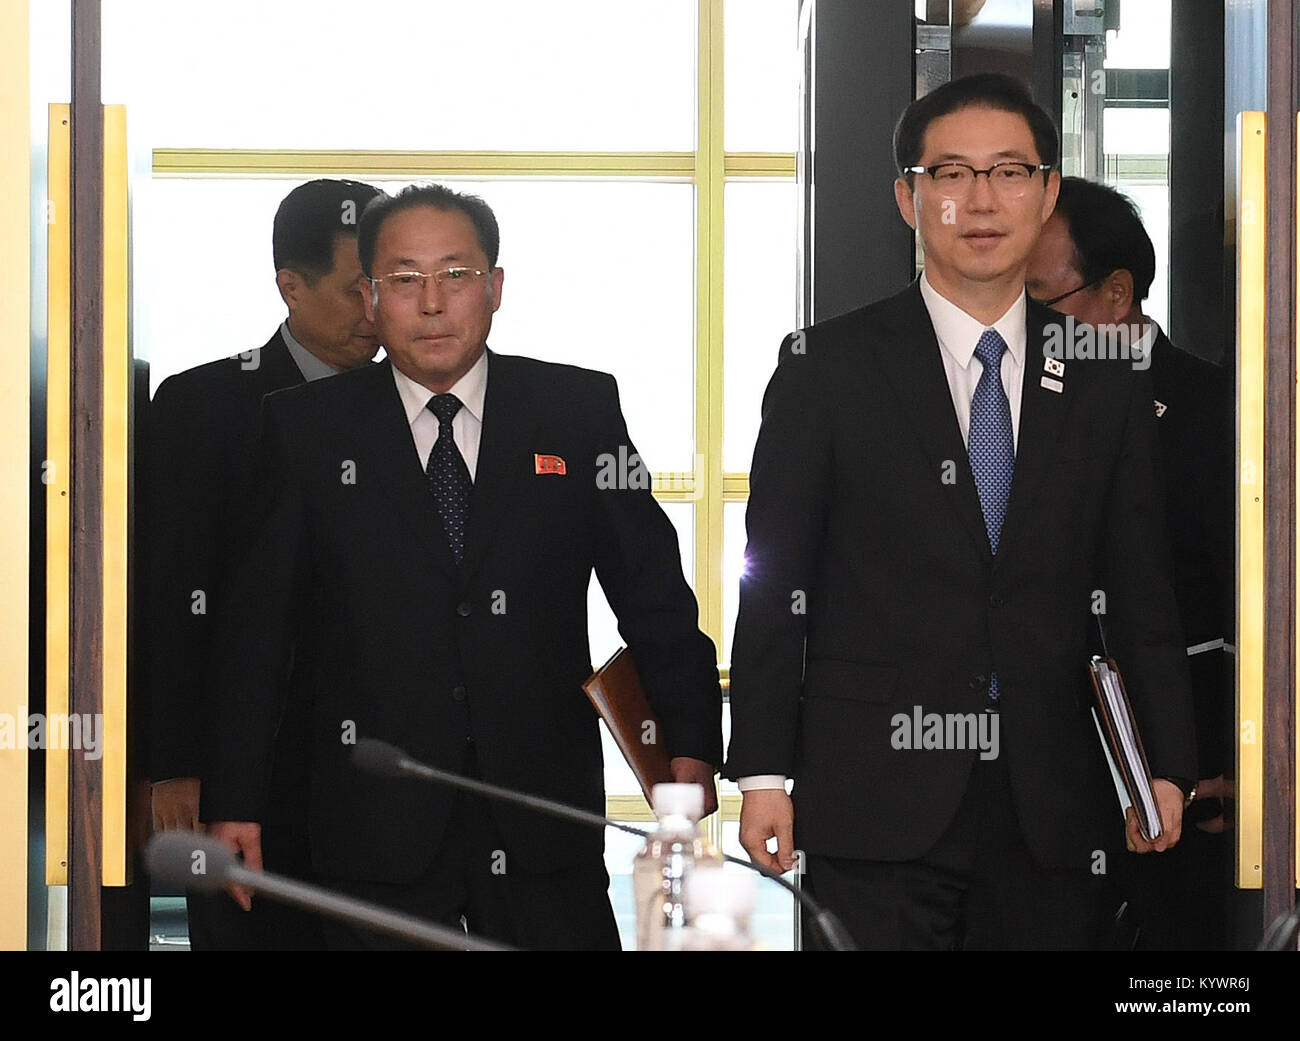 (180117) -- SEOUL, Jan. 17, 2018 (Xinhua) -- Chun Hae-sung(R), vice unification minister of South Korea, and Jon Jong Su, vice chairman of the Committee for the Peaceful Reunification of the Fatherland of the Democratic People's Republic of Korea (DPRK), arrive for talks at the truce village of Panmunjom, Jan. 17, 2018. Working-level talks between South Korea and DPRK were underway Wednesday at the truce village of Panmunjom to discuss the DPRK's dispatch of athletes to the South Korea-hosted Winter Olympics, Seoul's Unification Ministry said. (Xinhua/South Korean Unification Ministry) (psw) Stock Photo